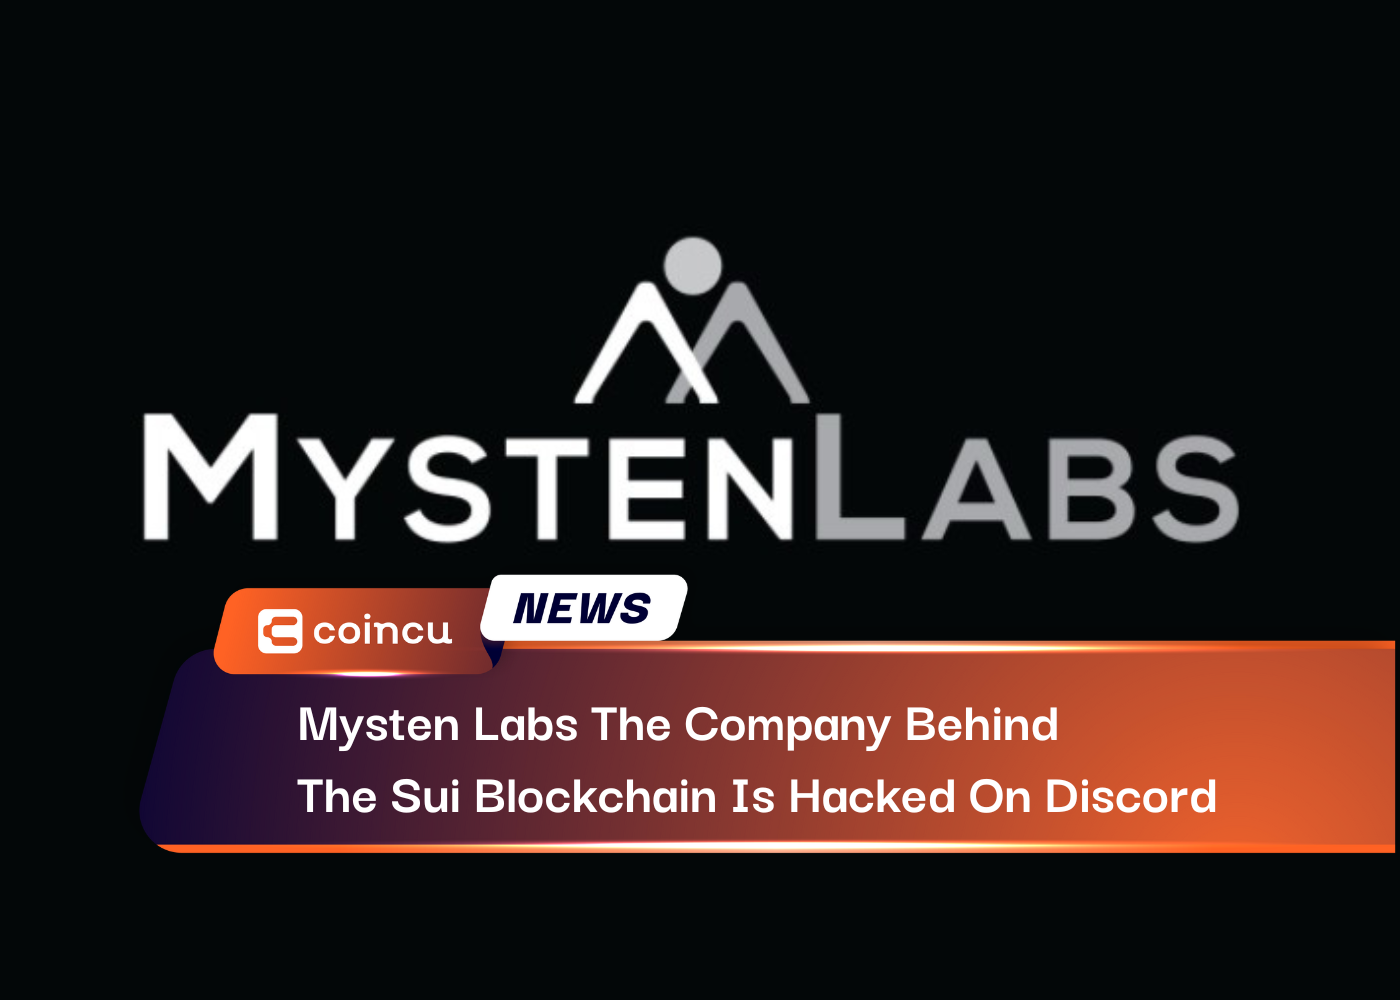 Mysten Labs The Company Behind